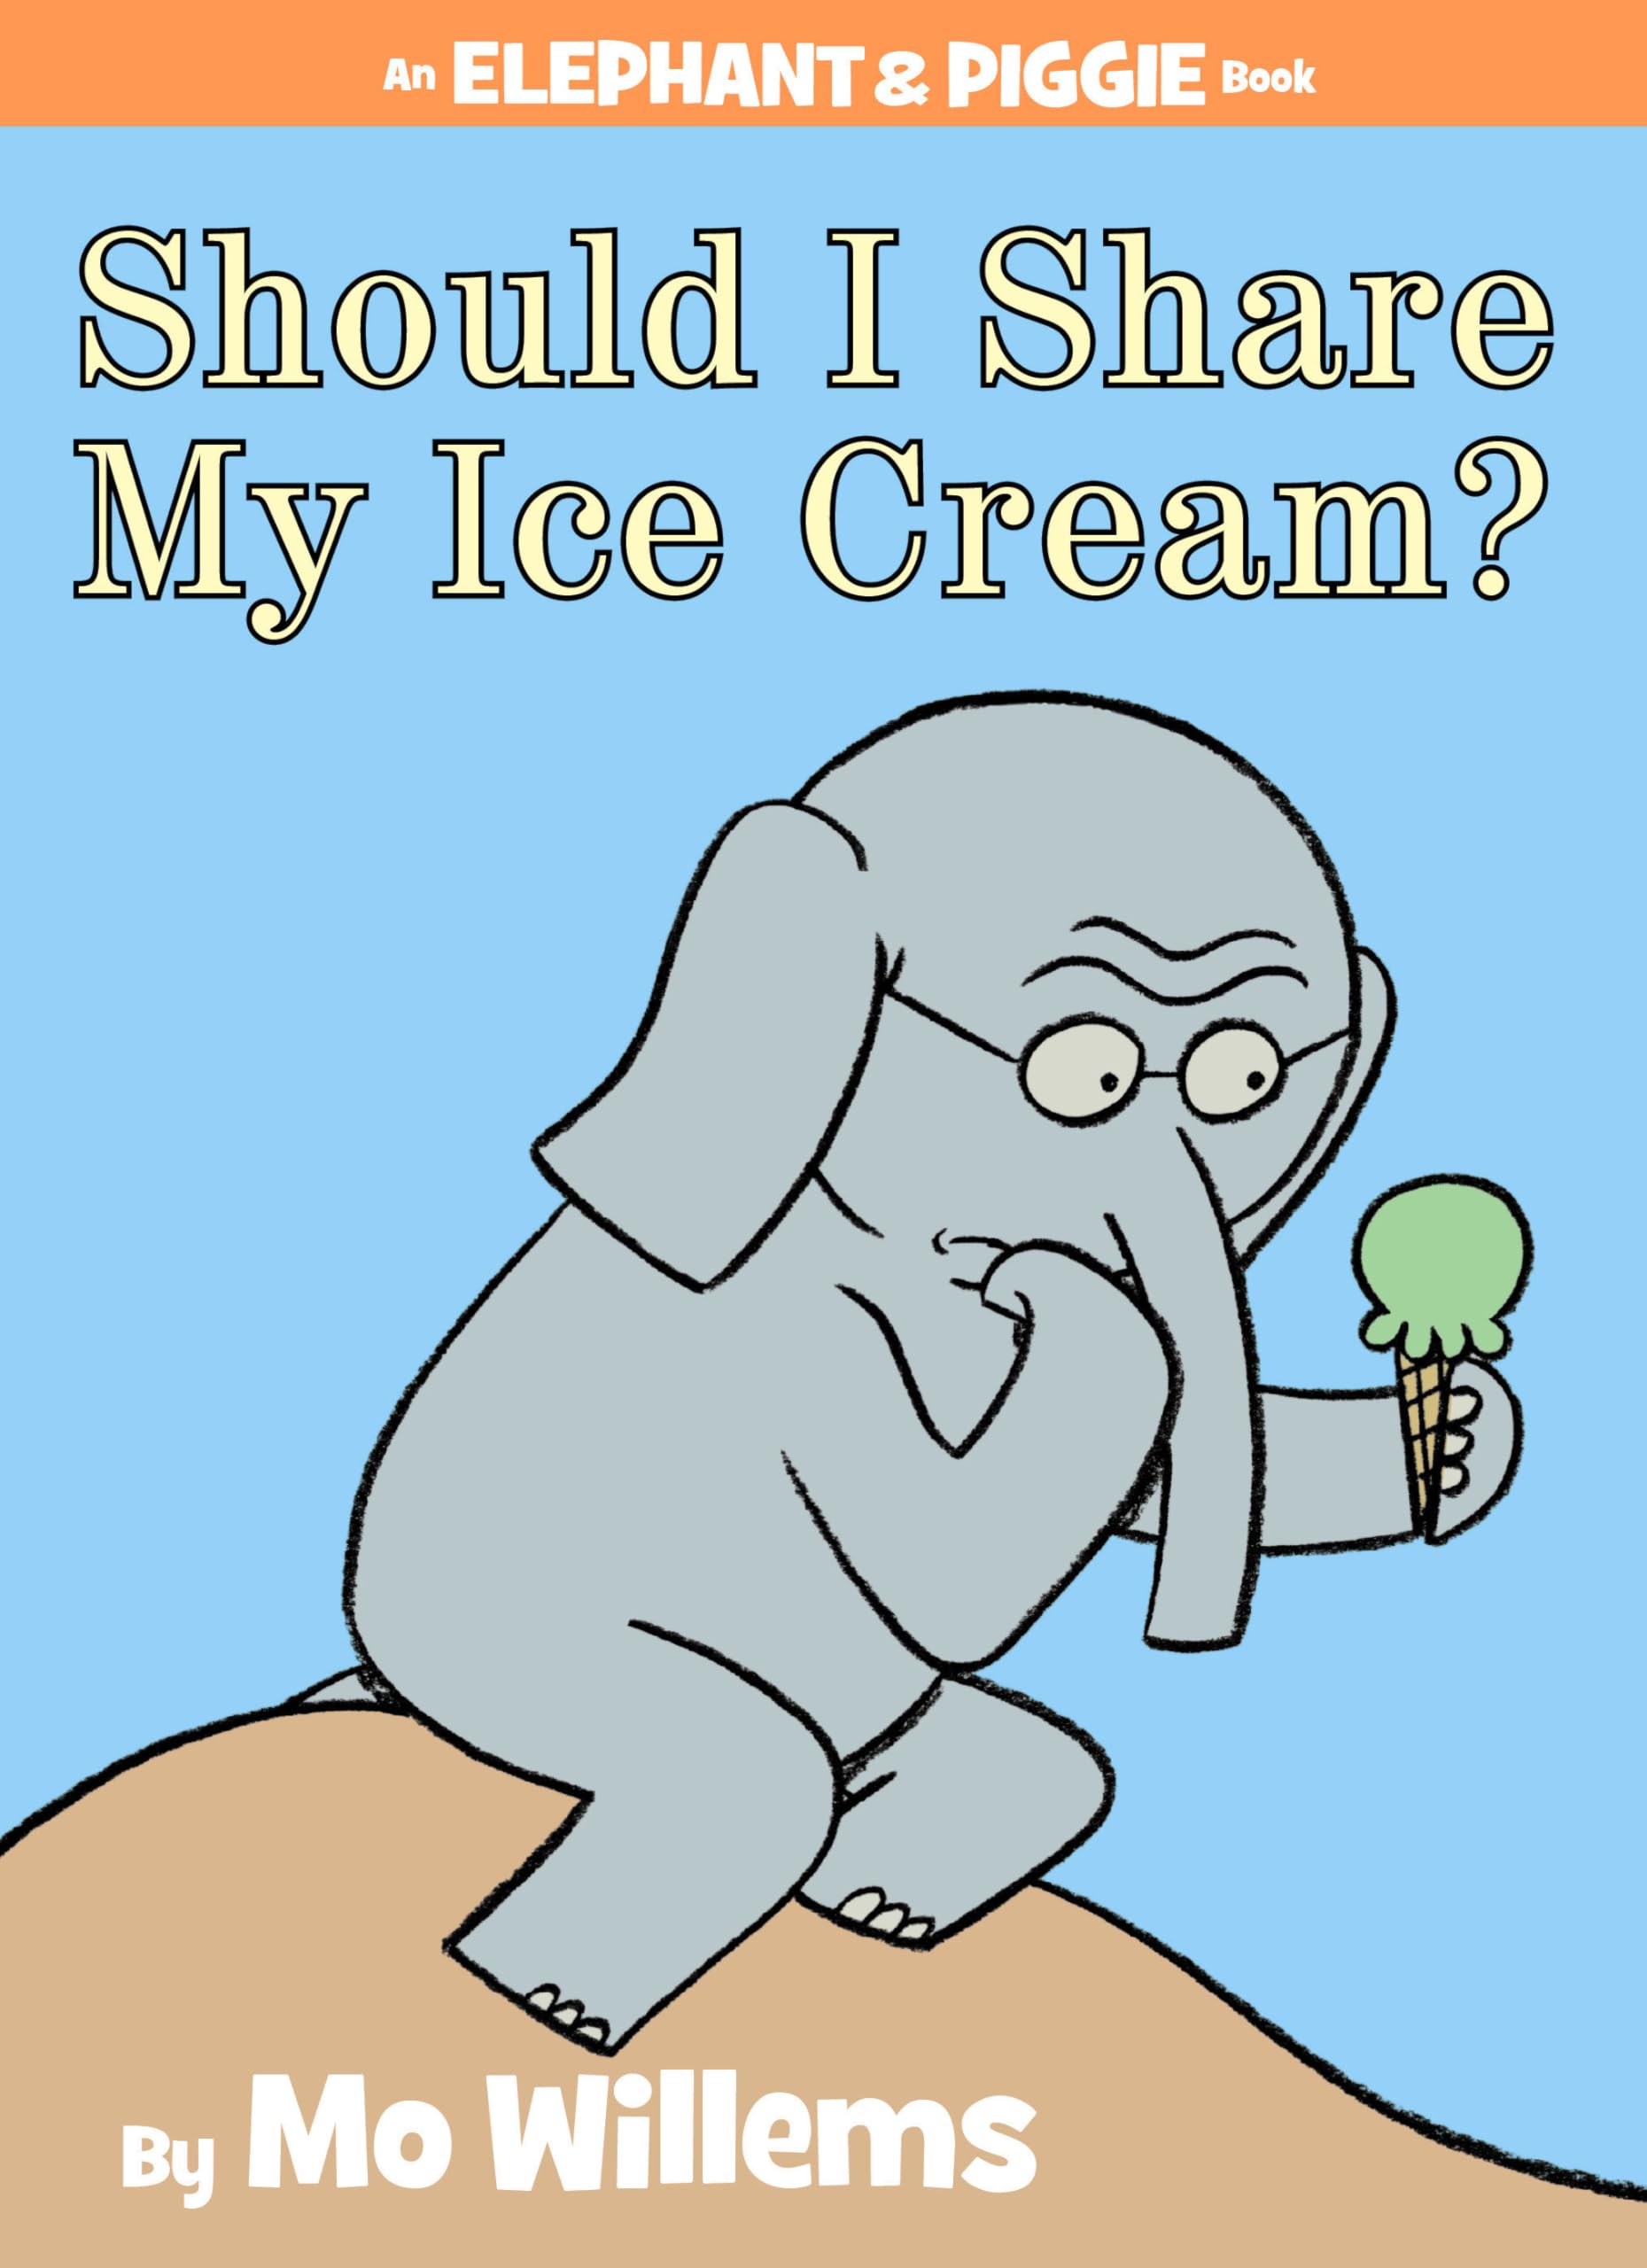 title with illustrated elephant and ice cream cone